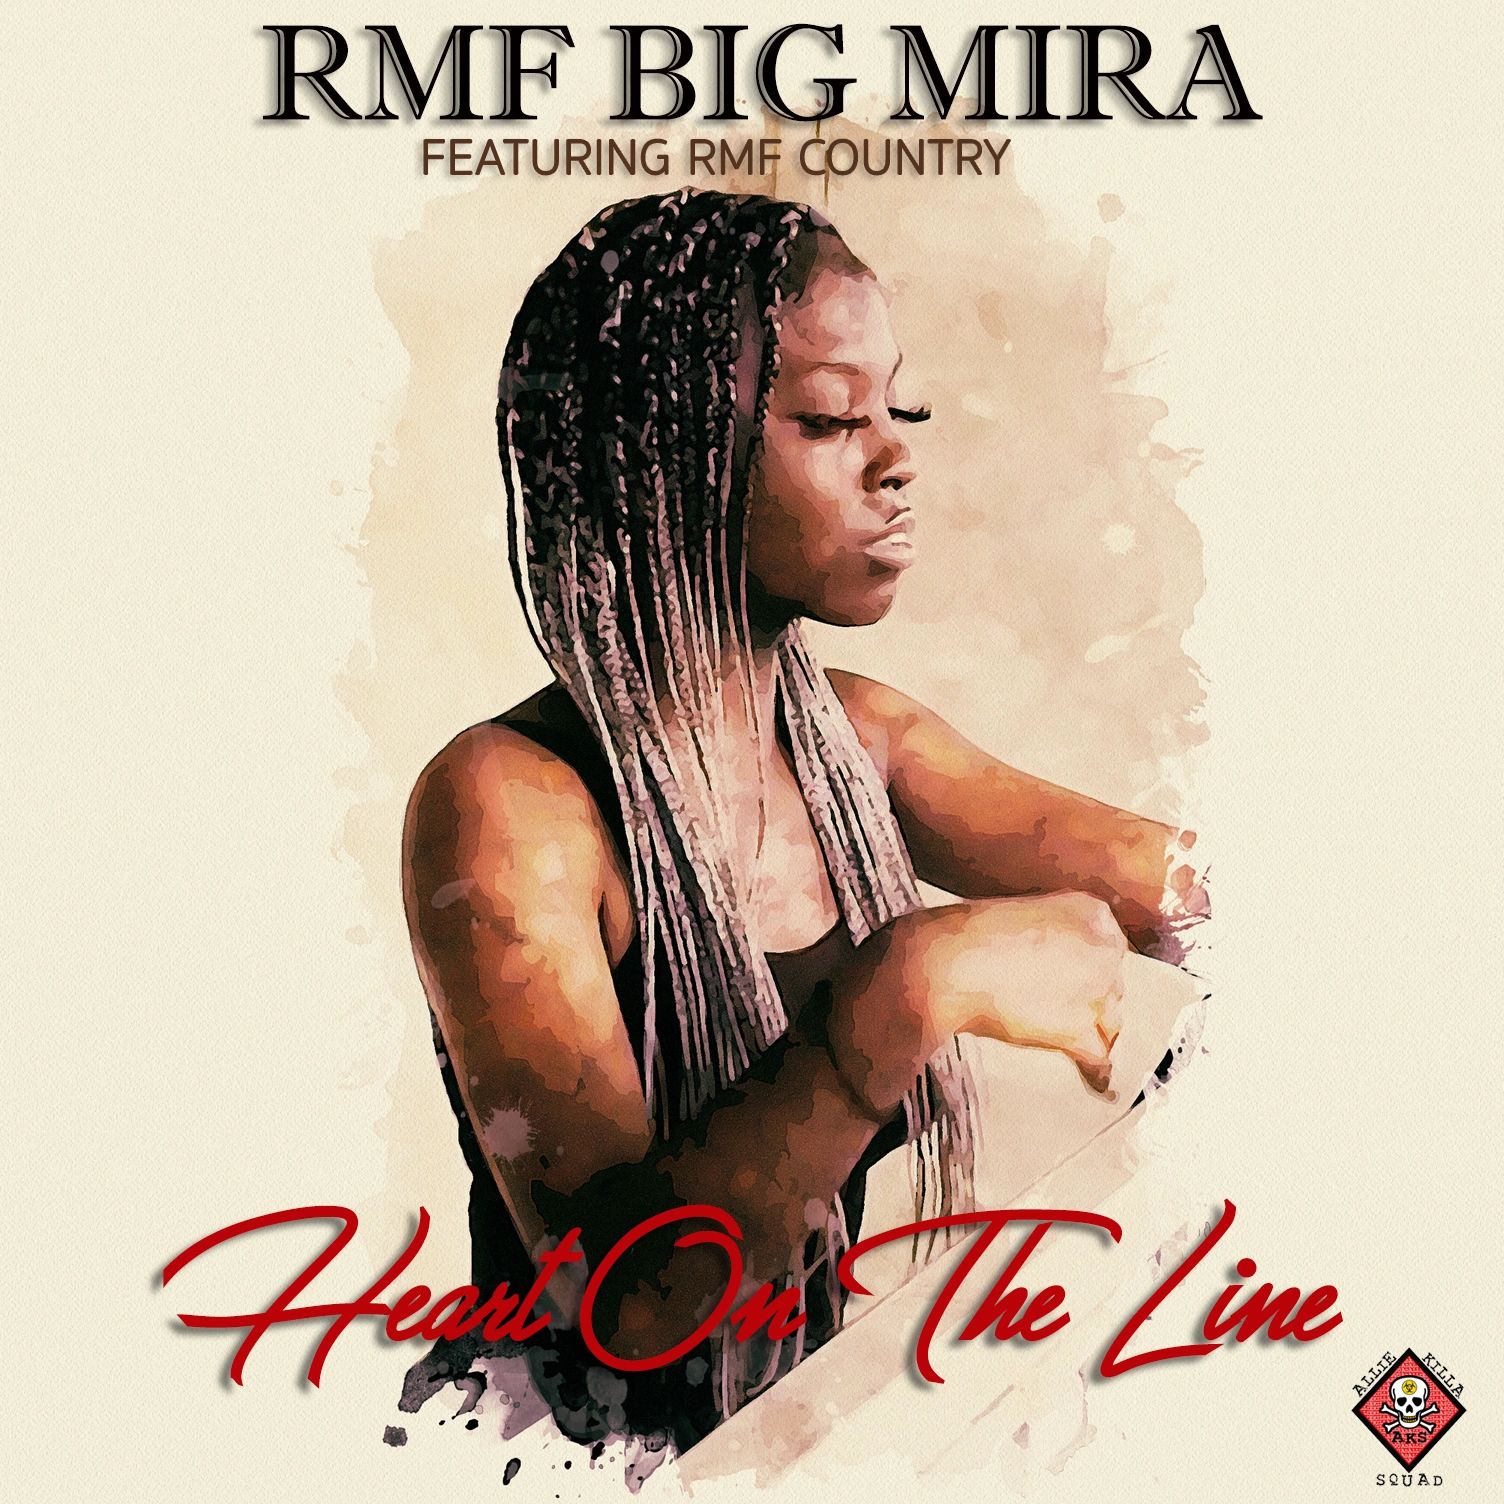 "Heart on the Line" 1st single from RMF's Big Mire featuring RMF Country available Oct 16,2023